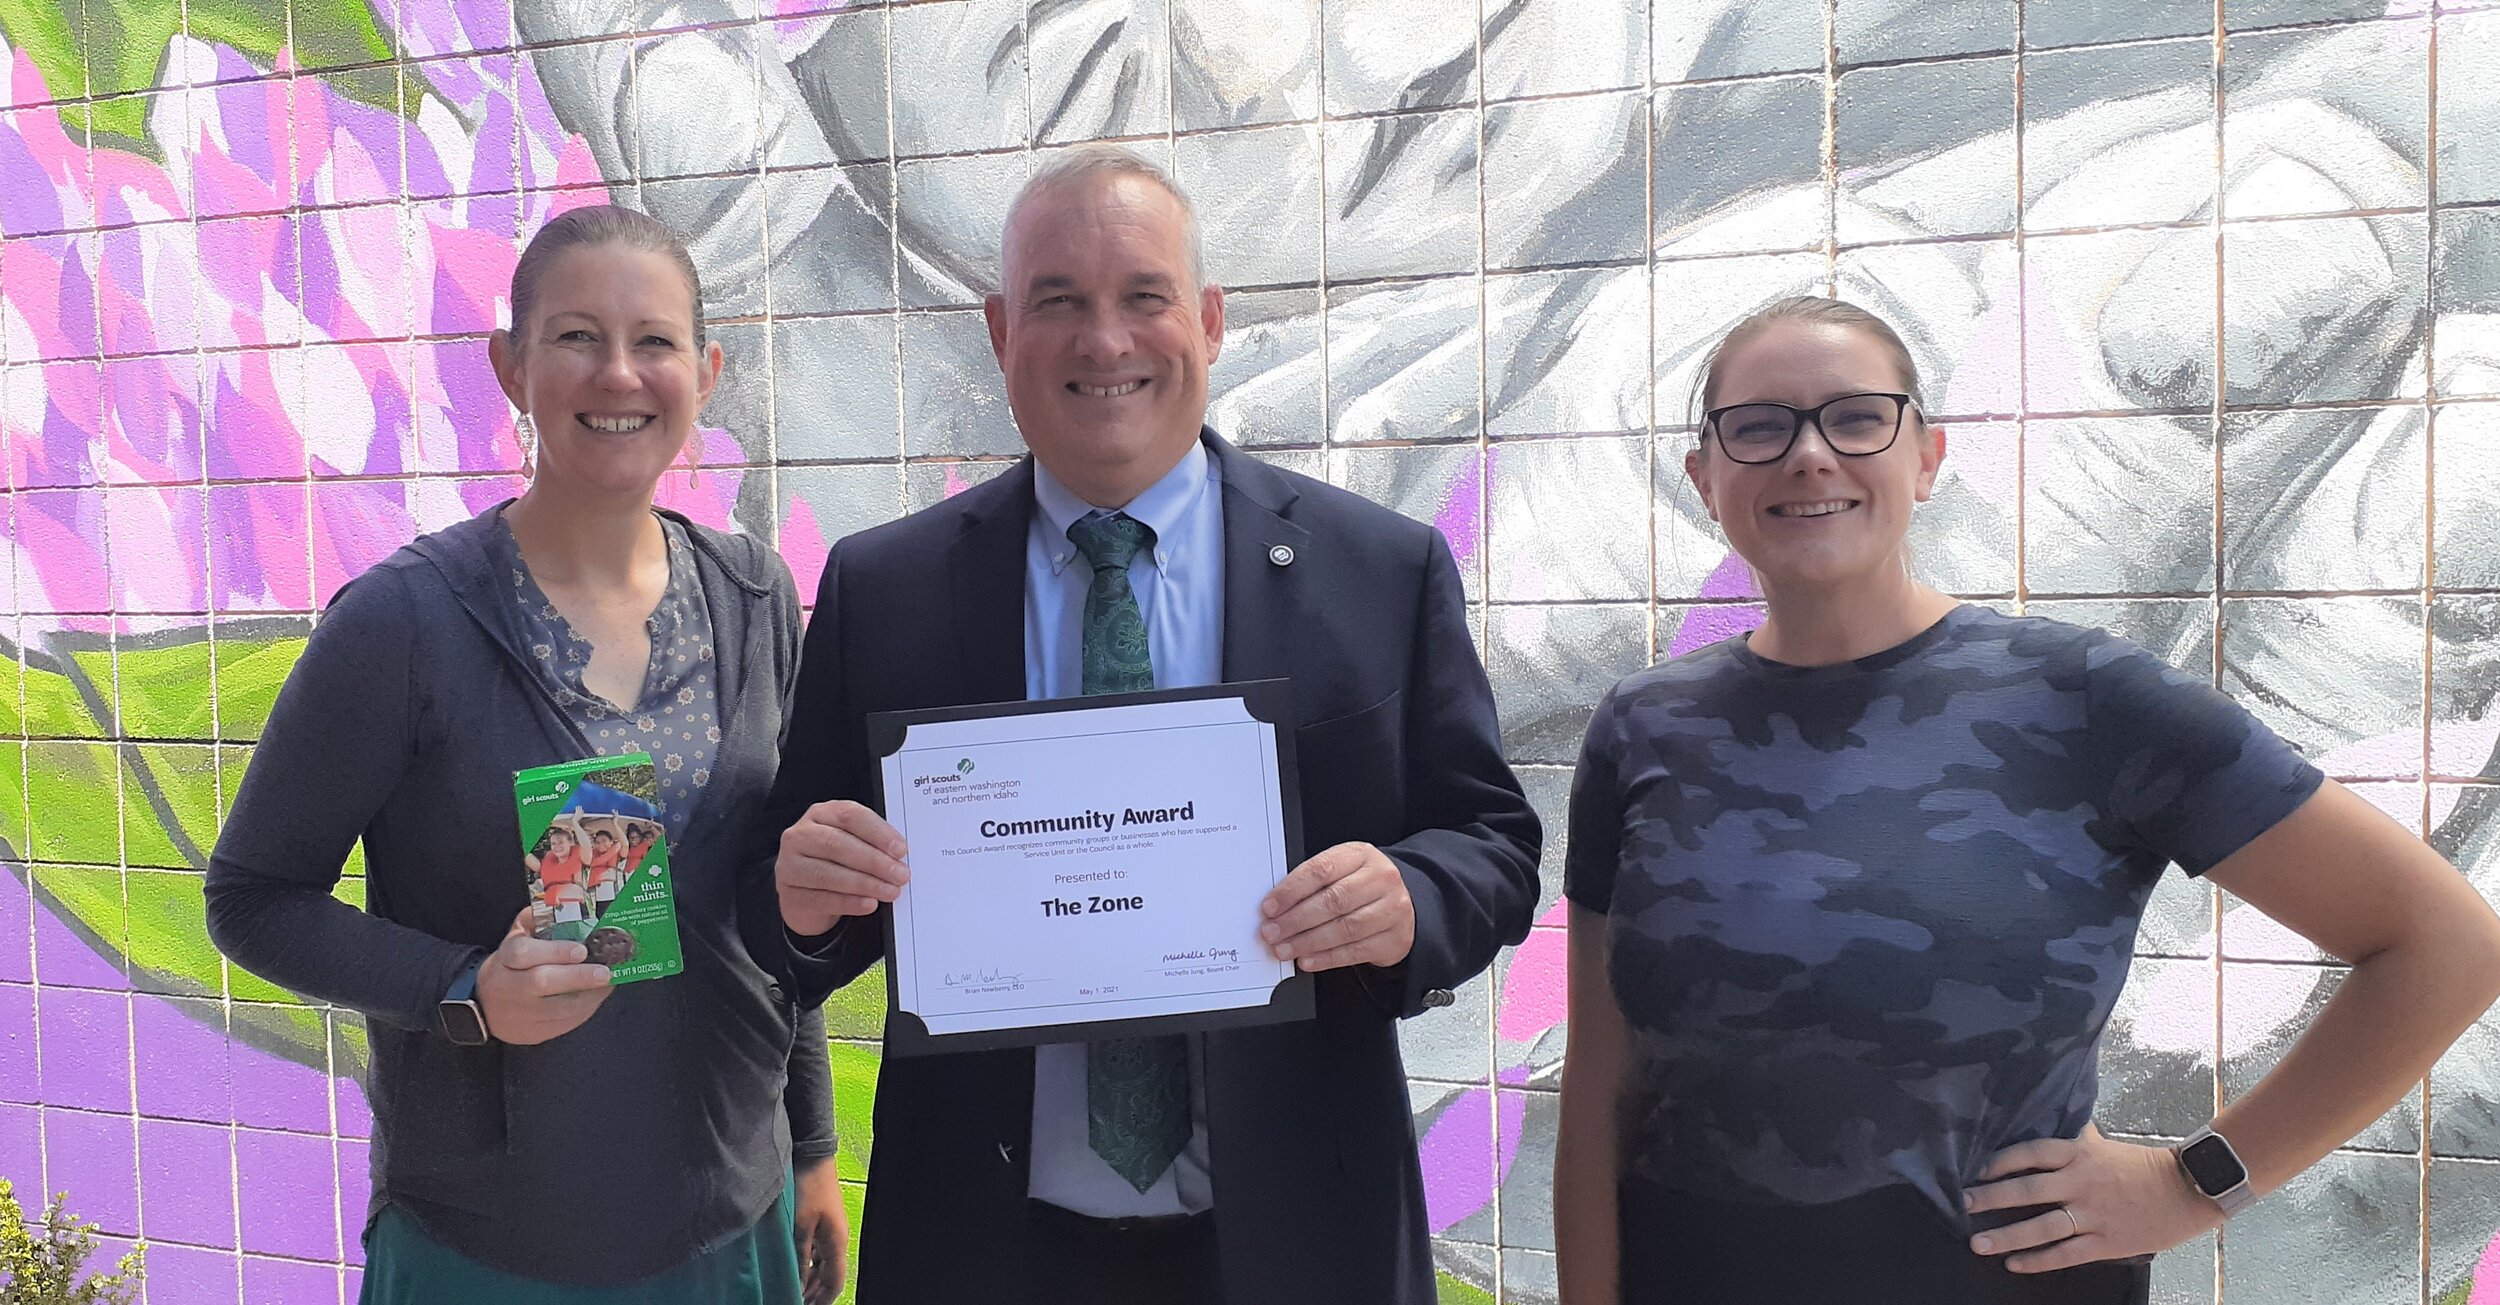 Girl Scouts Executive Director Brian Newberry presenting the Community Award to The ZONE with Amber Waldref, Director and Krysten Proszek, Expanded Learning Coordinator.